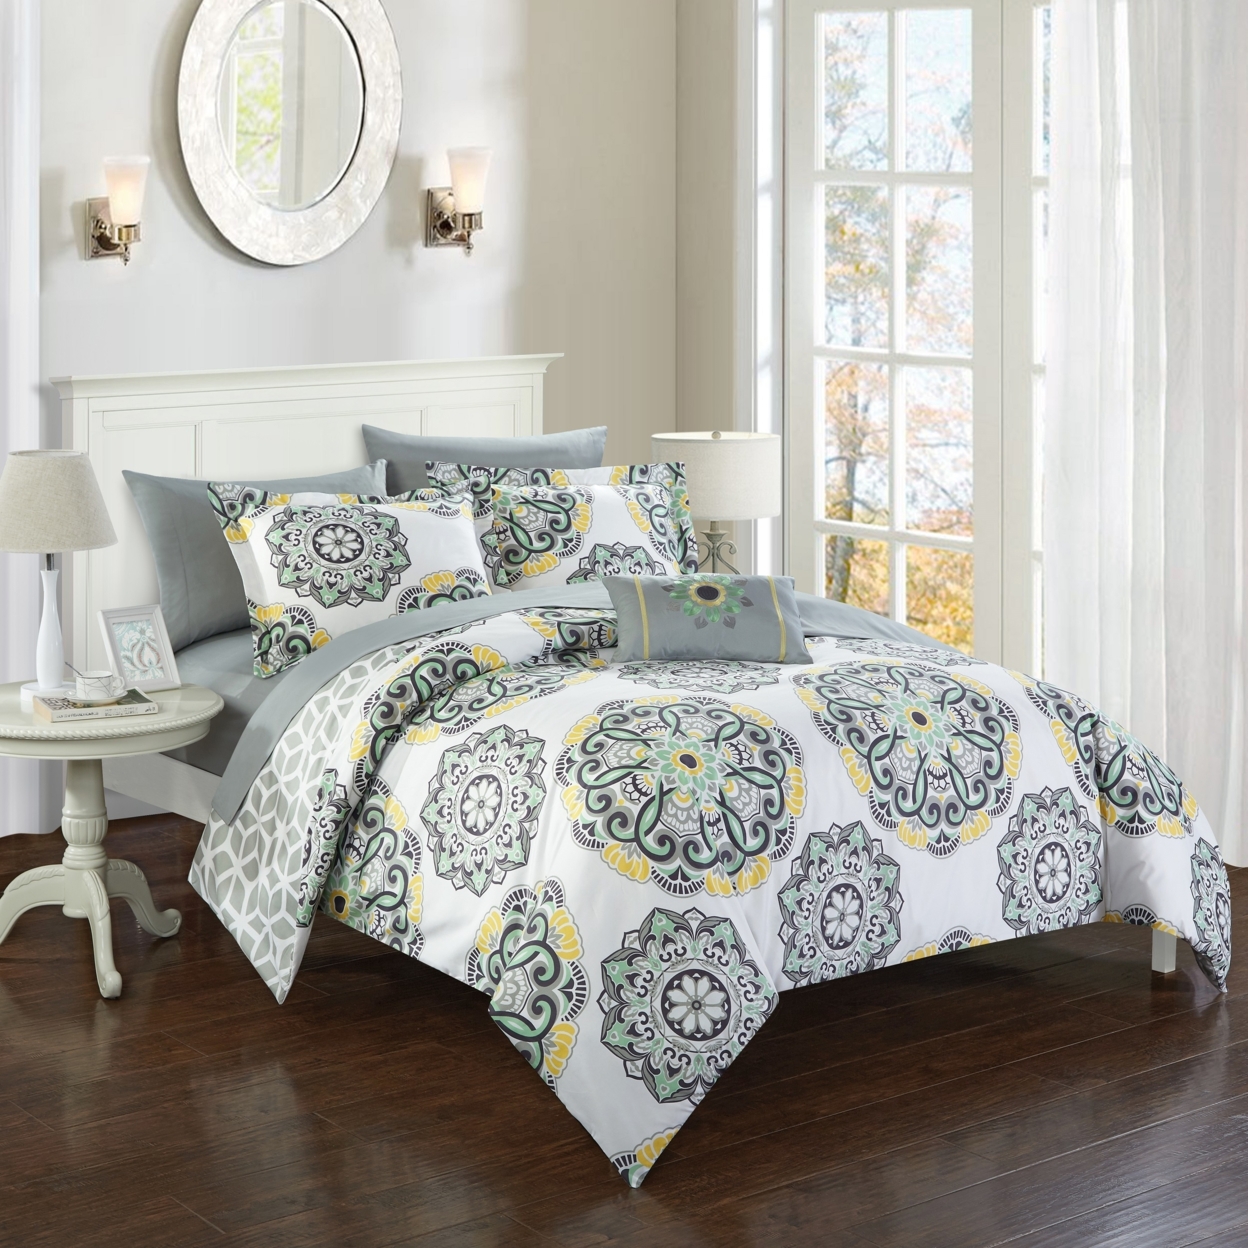 8 Or 6 Pc. Barella Super Soft Large Printed Medallion REVERSIBLE With Geometric Printed Backing Comforter Set - Grey, Queen